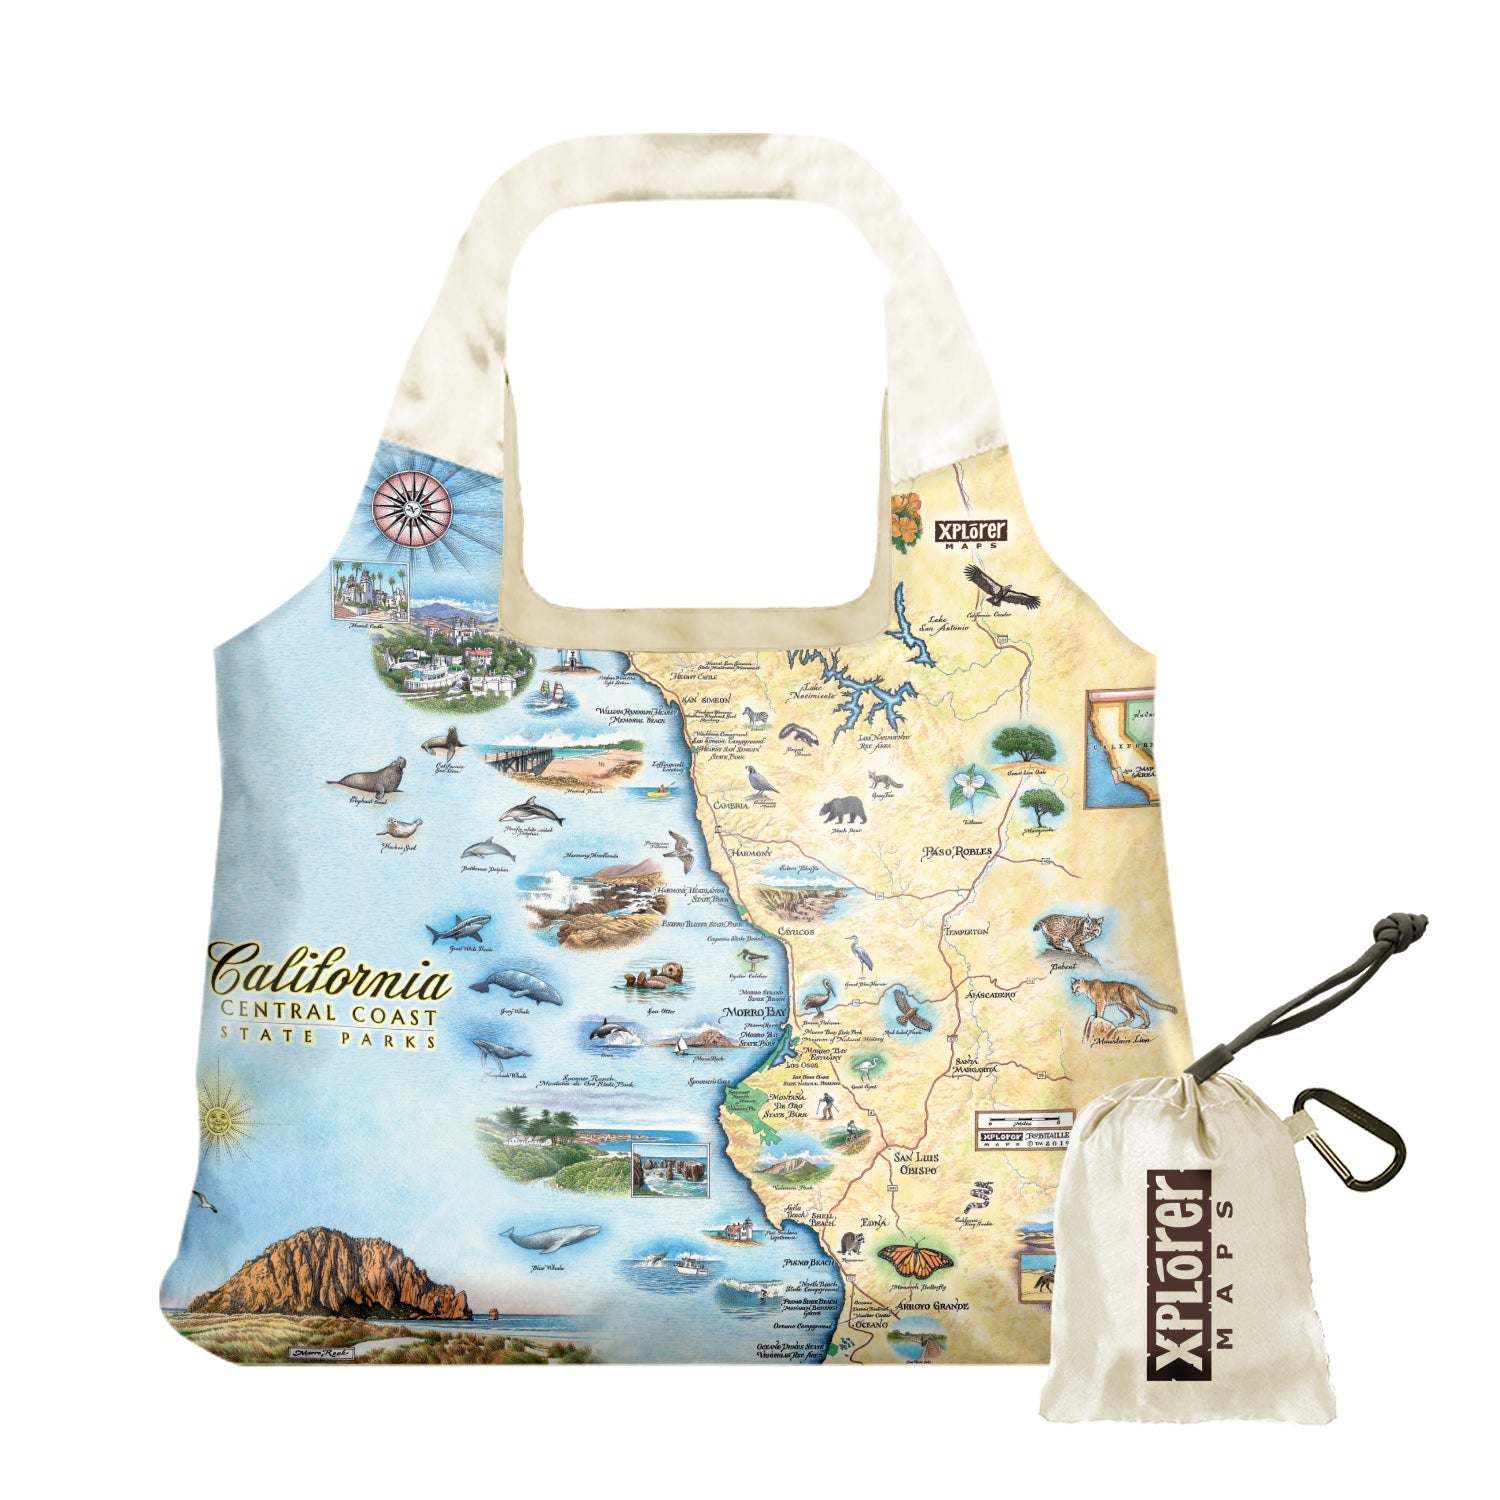 California Central Coast State Parks Map Pouch Tote Bag in earth tones. Featuring wildlife viewing is abundant with sea life, birding, and terrestrial creatures. Cultural history is rich in the area with the fame of Hearst Castle, Ranchers of Montana De Oro, Dunites of Oceano Dunes, and Native people that have lived on this land for thousands of years from San Francisco to Los Angeles.